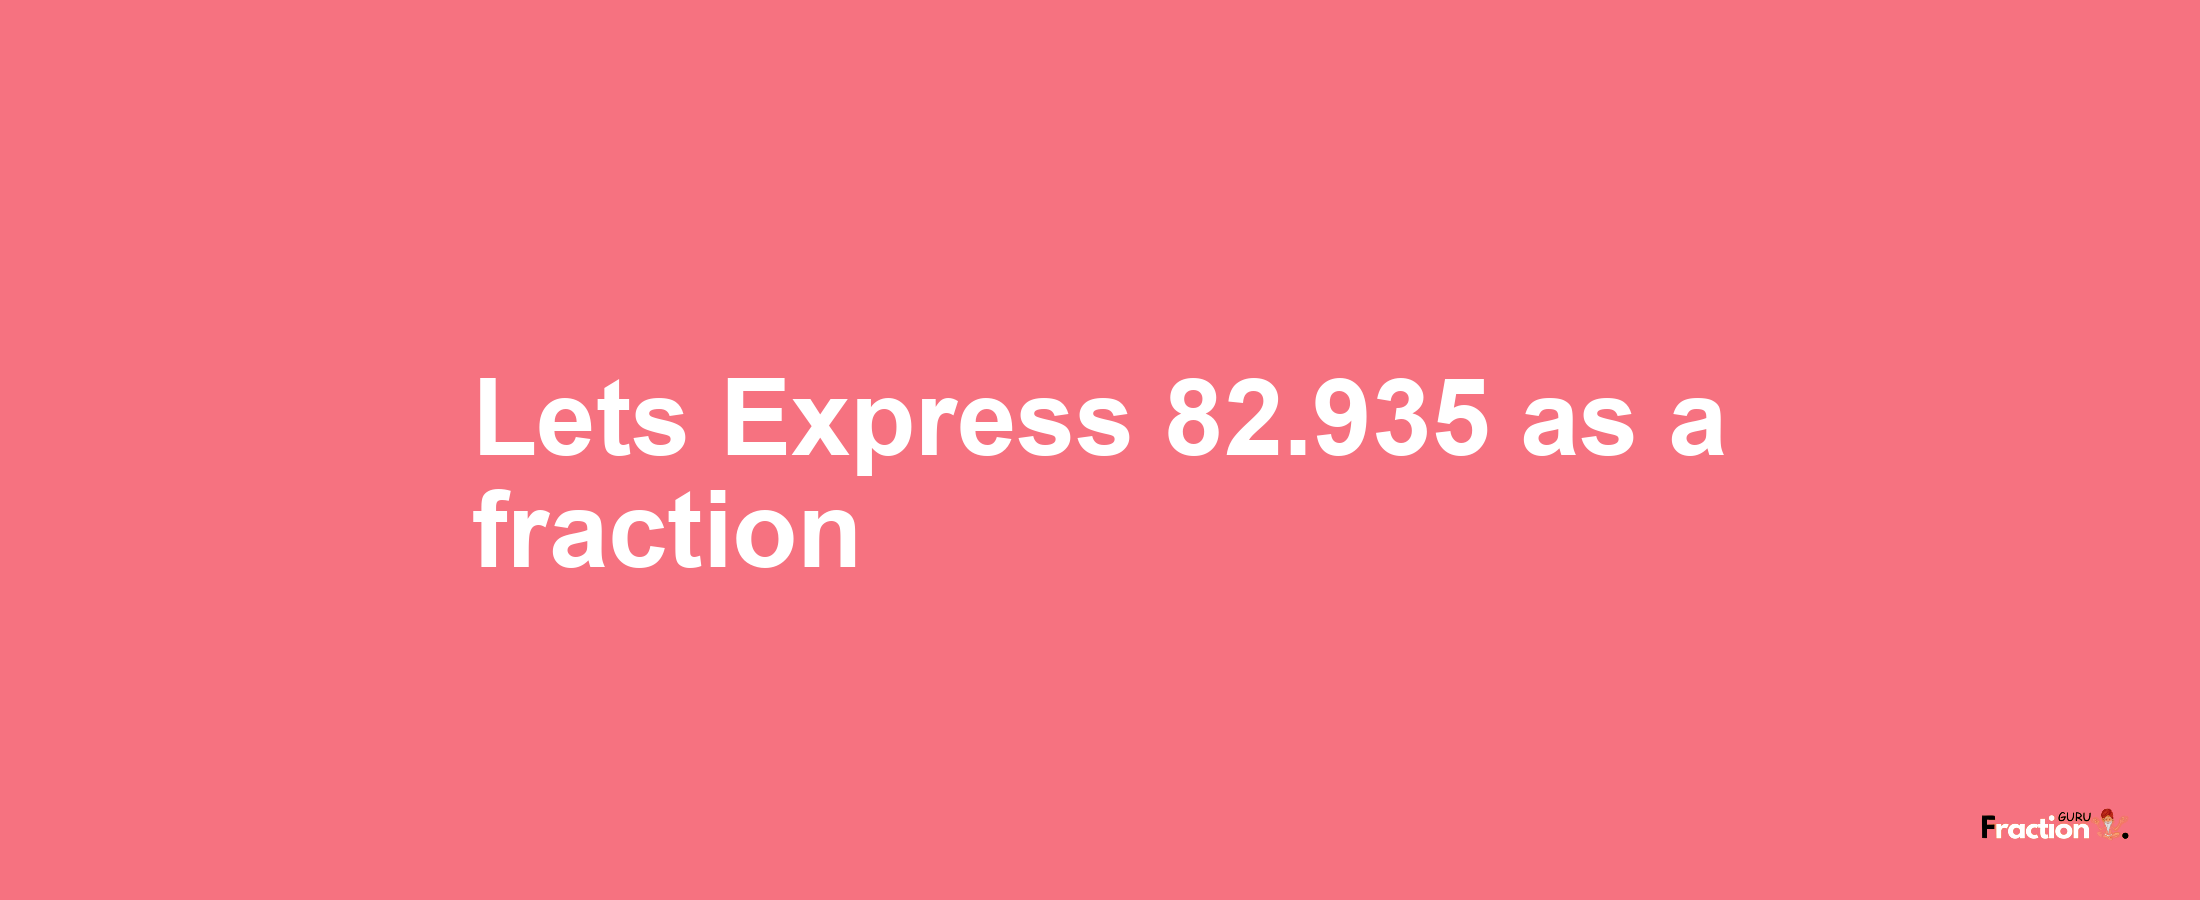 Lets Express 82.935 as afraction